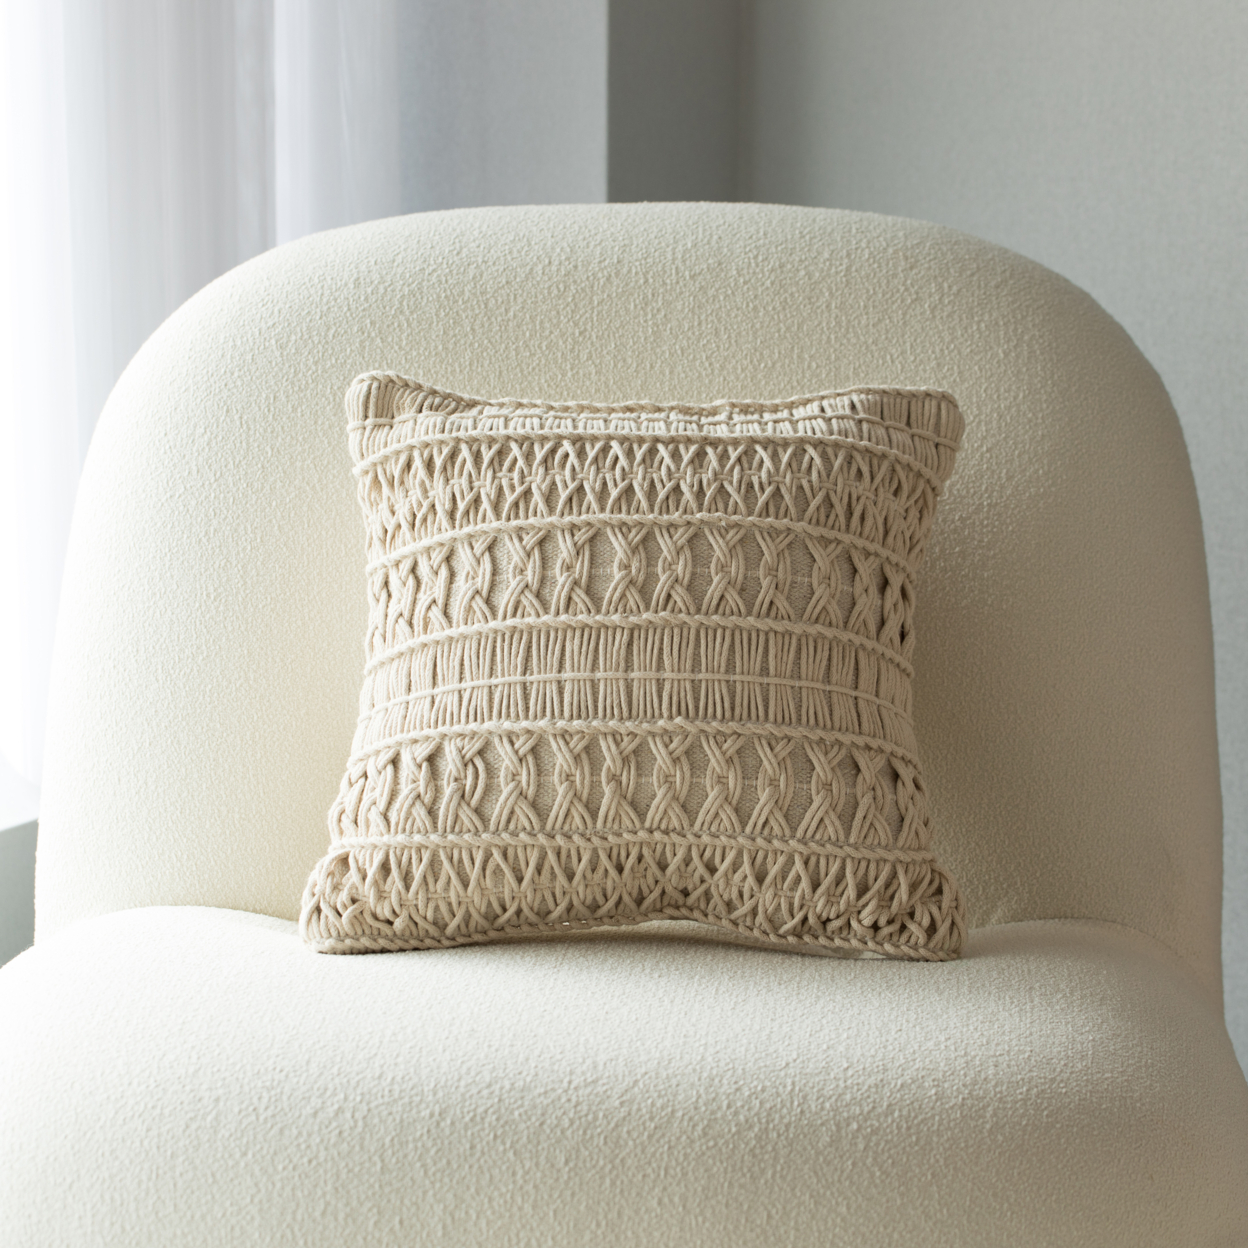 16 Handwoven Cotton Throw Pillow Cover With Layered Random String Pattern - Pillowcase With Cushion